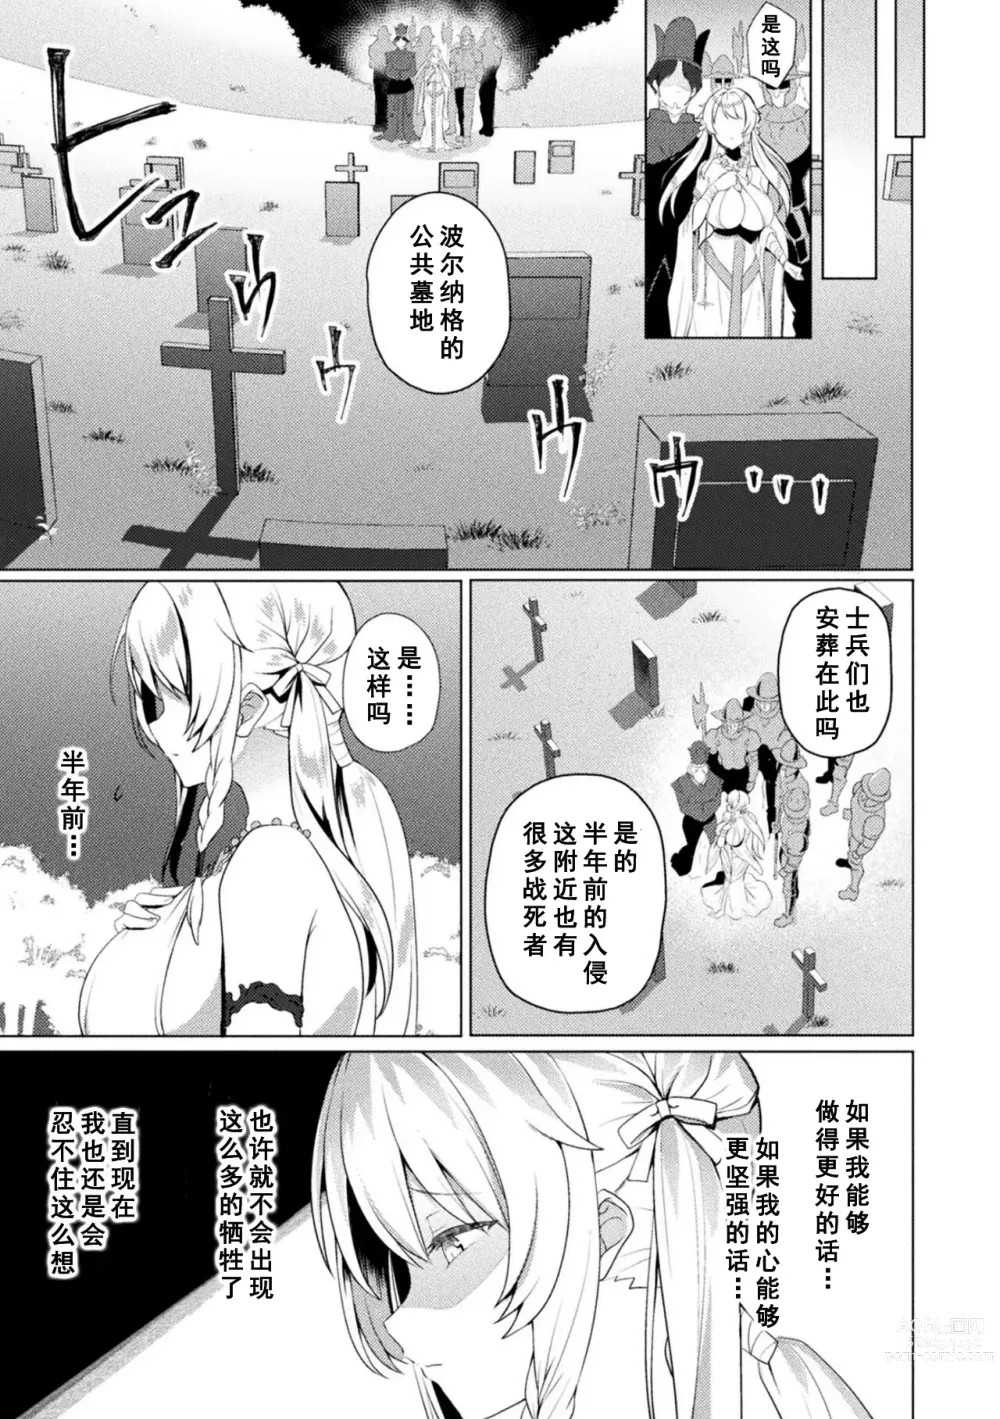 Page 7 of manga Edens Ritter Ch. 1 Gaiden - Innan no Mikohime Cecily Hen THE COMIC Ch. 1